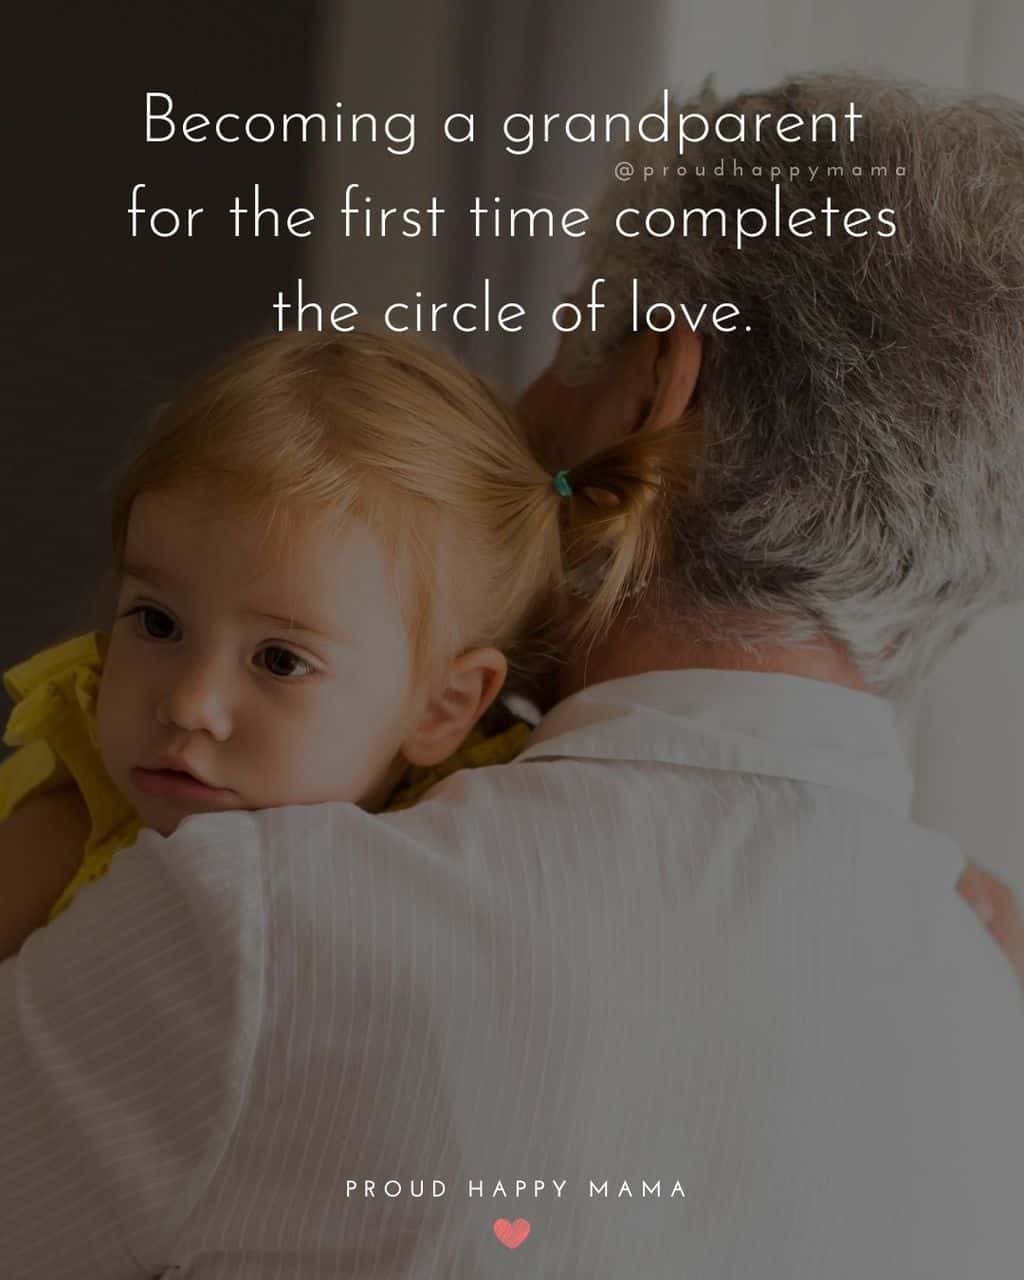 Grandparent Quotes – Becoming a grandparent for the first time completes the circle of love.’